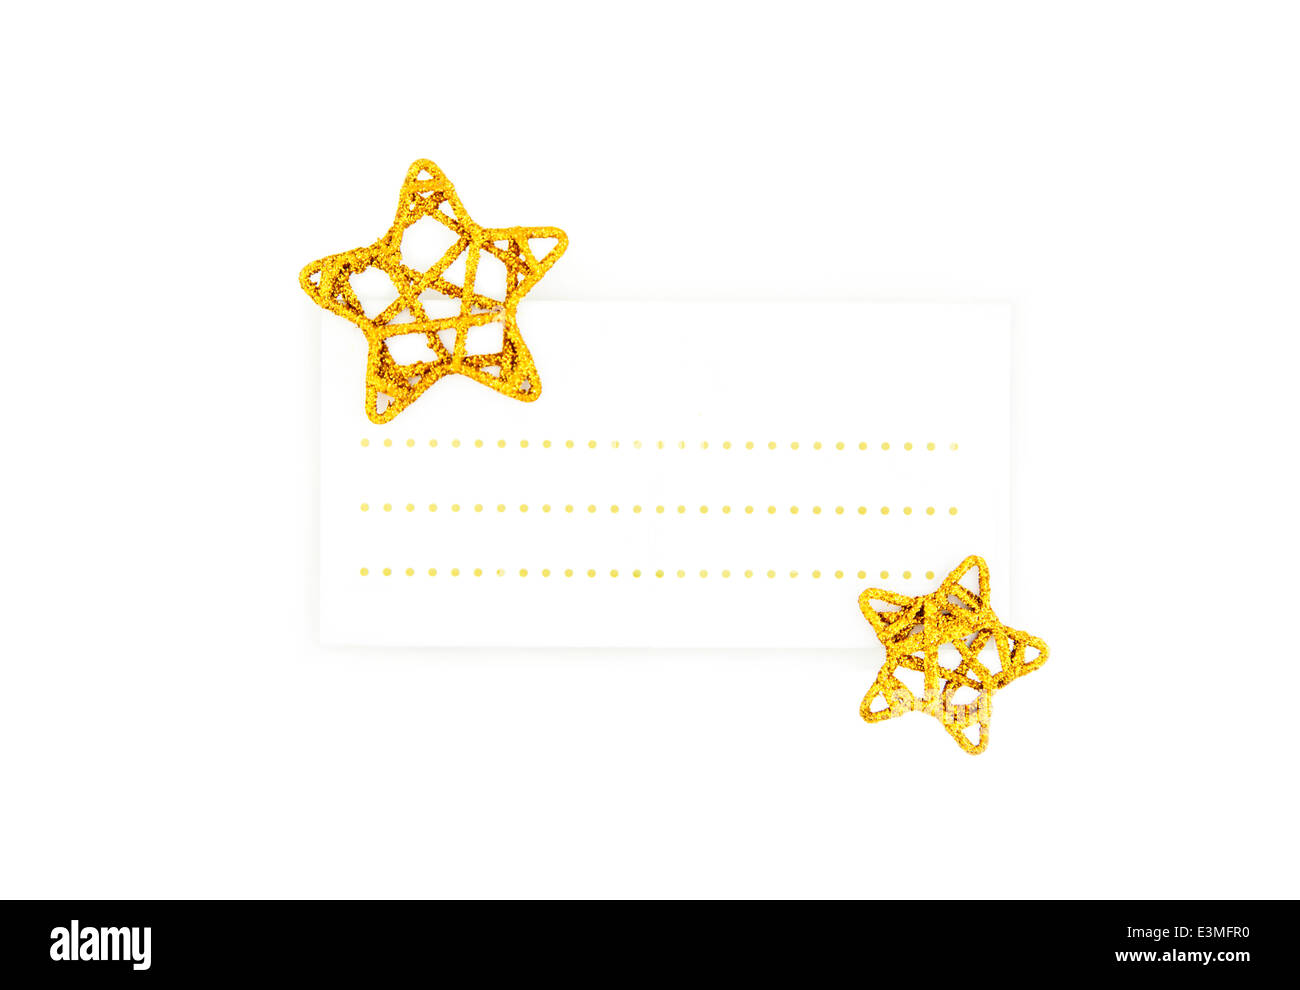 Blank card with golden stars for Christmas messages. Stock Photo